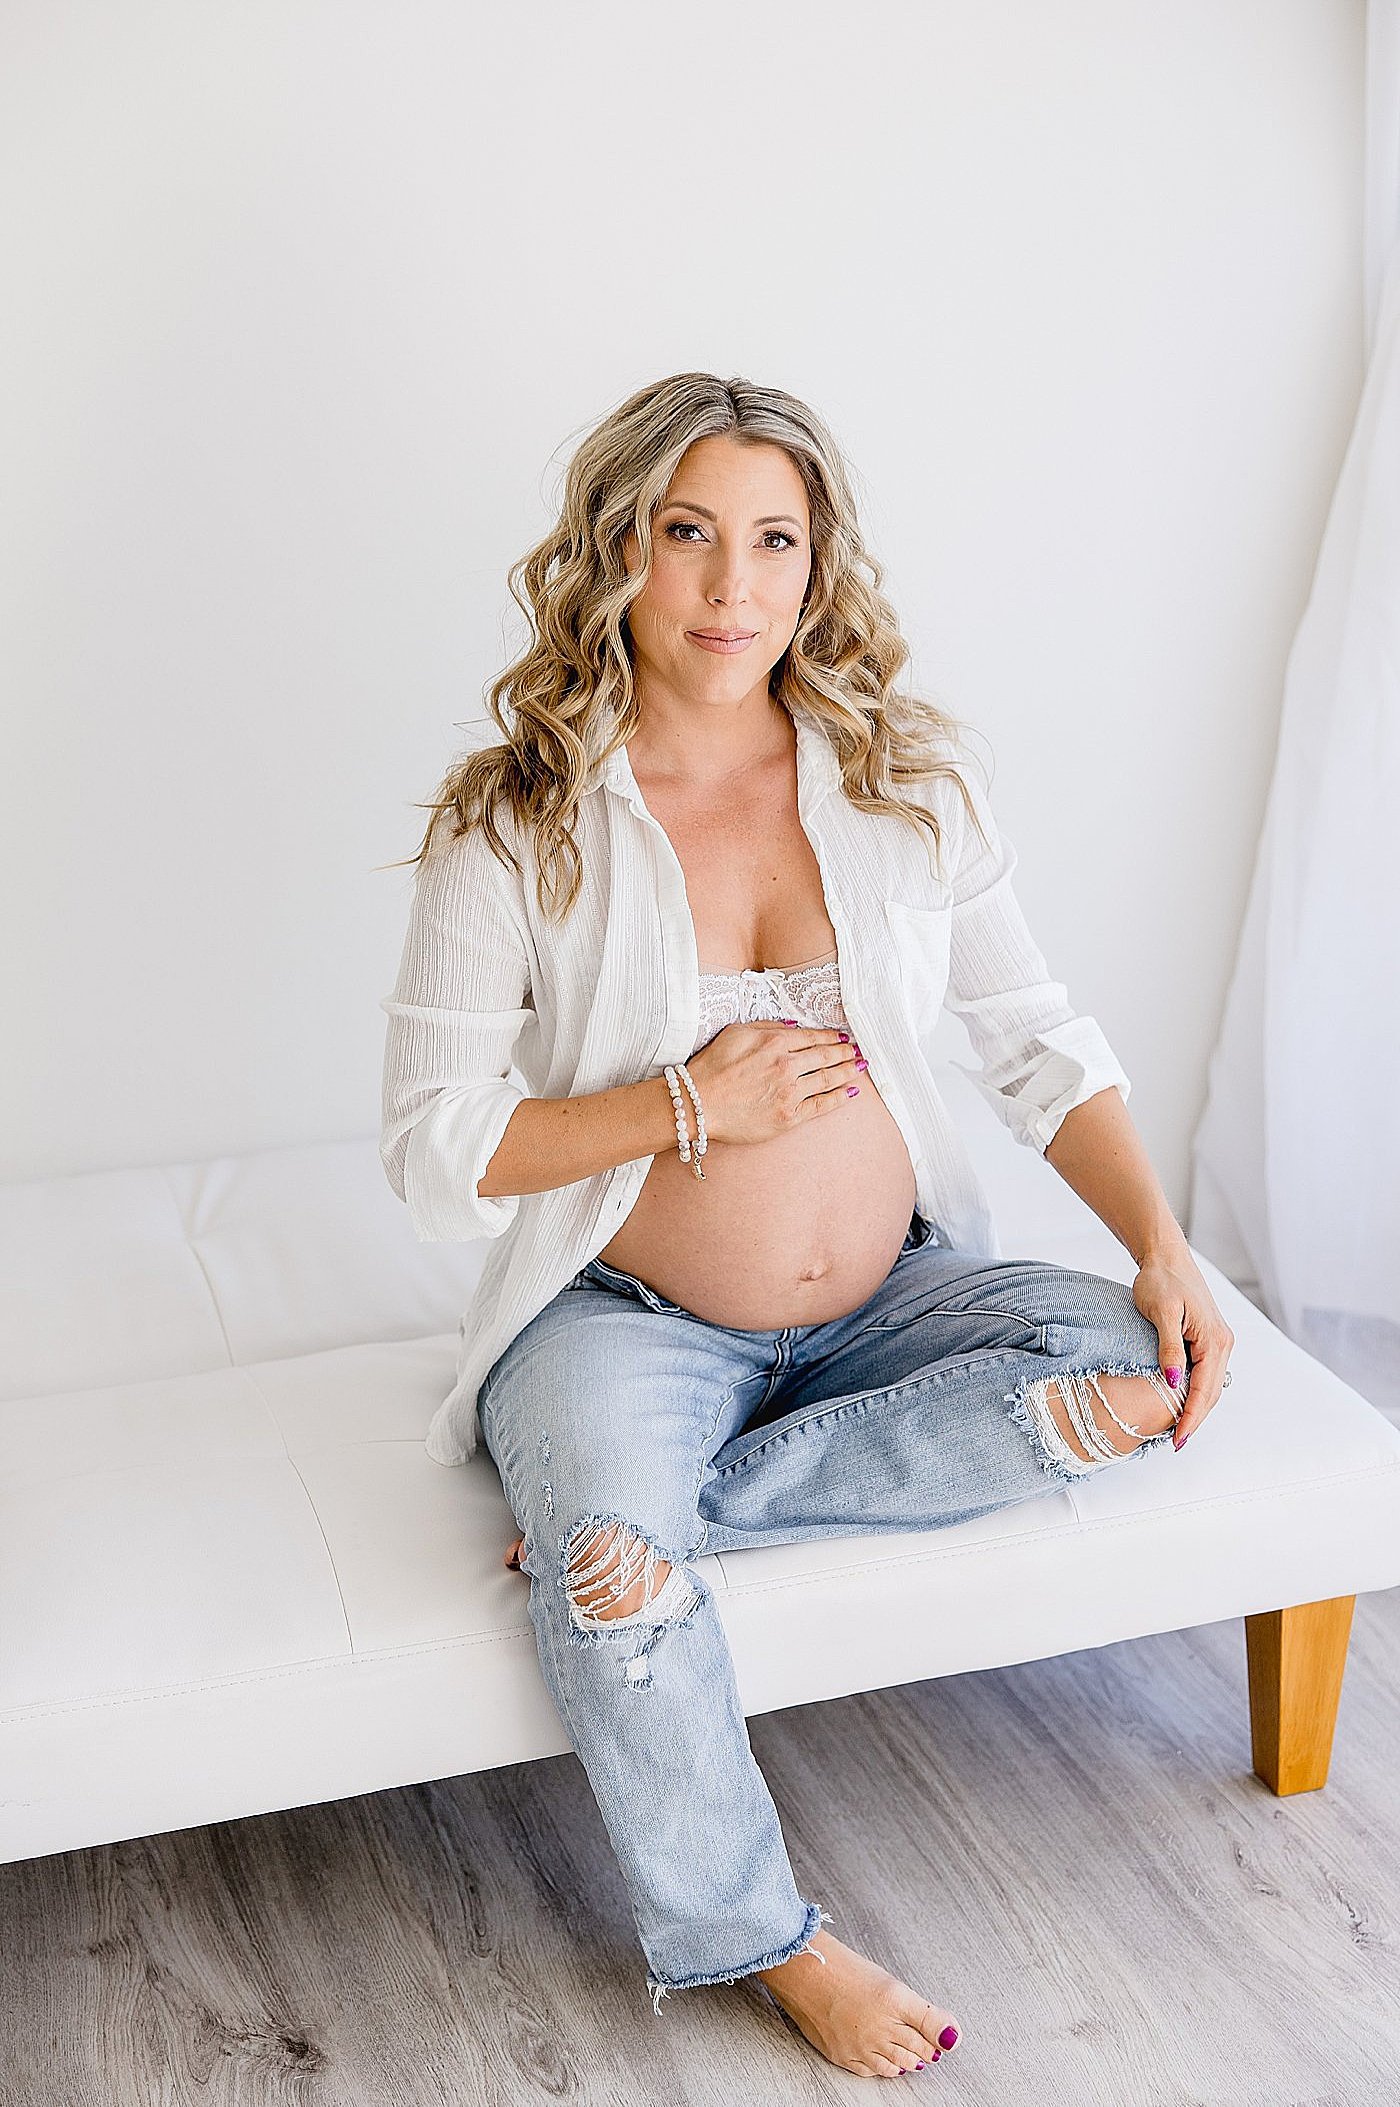 Tips-On-What-To-Wear-For-A-Maternity-Session-Newport-Beach-Maternity-Photographer_0022.jpg